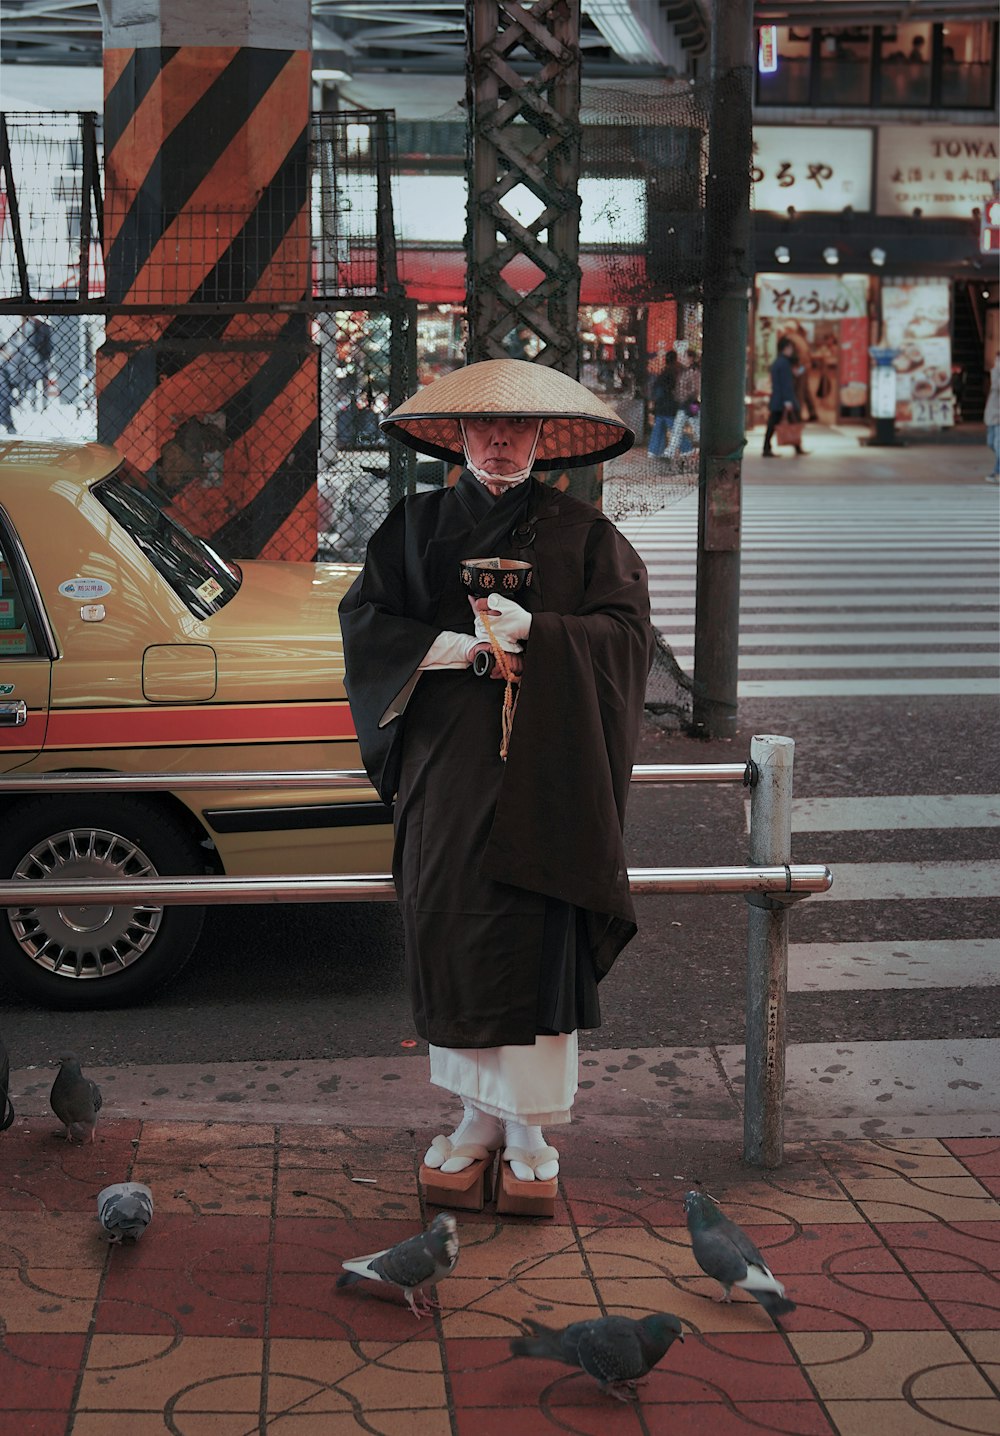 a woman standing on a street corner with pigeons around her